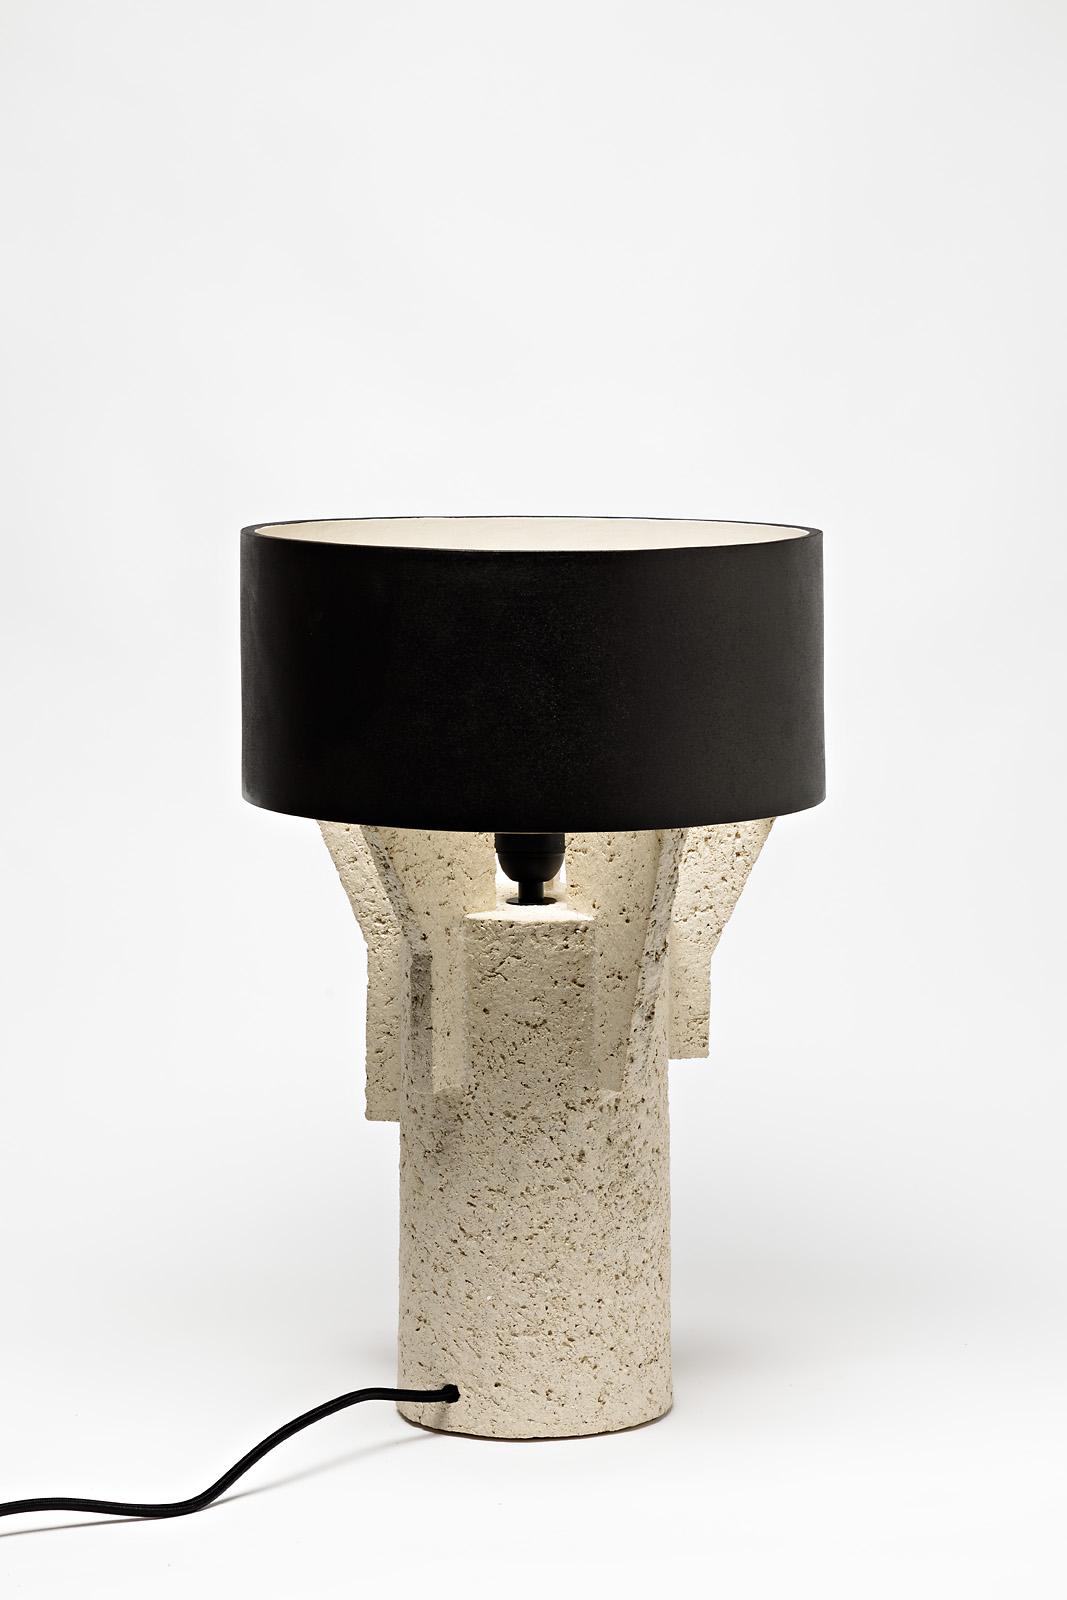 French Pair of Ceramic Table Lamps by Denis Castaing with Brown Glaze, 2019 For Sale